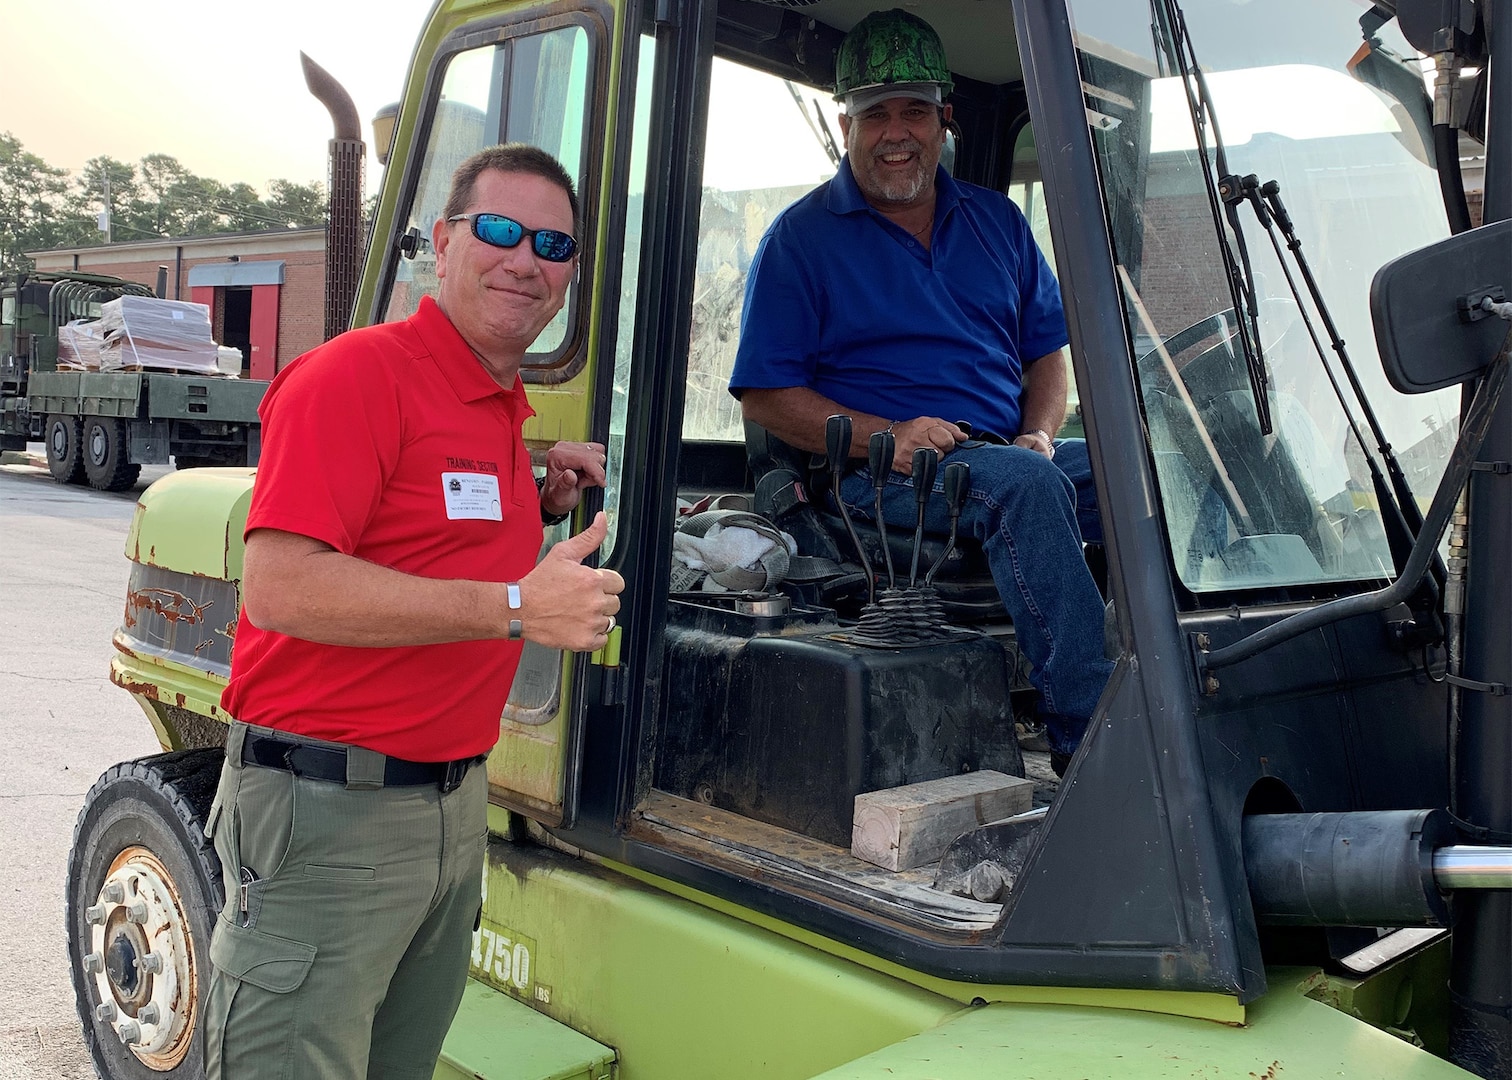 Detective Ben Parrish, Duplin County Sheriff’s Department, left, and Darryl Whaley, county garage supervisor, enjoy a moment with the forklift they acquired from DLA Disposition Services at Camp Lejeune, North Carolina.